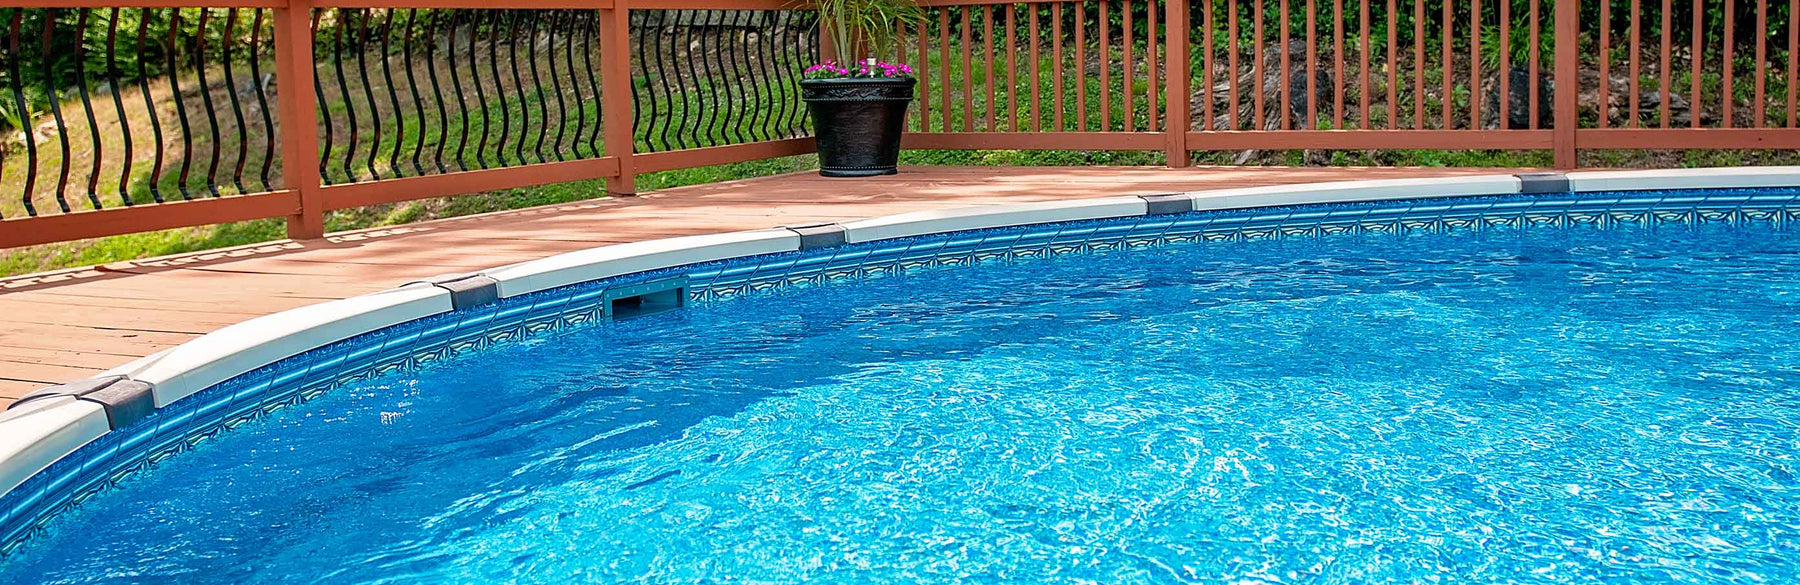 3 Easy Ways To Know When To Replace Your Pool Liner - Great Backyard Place